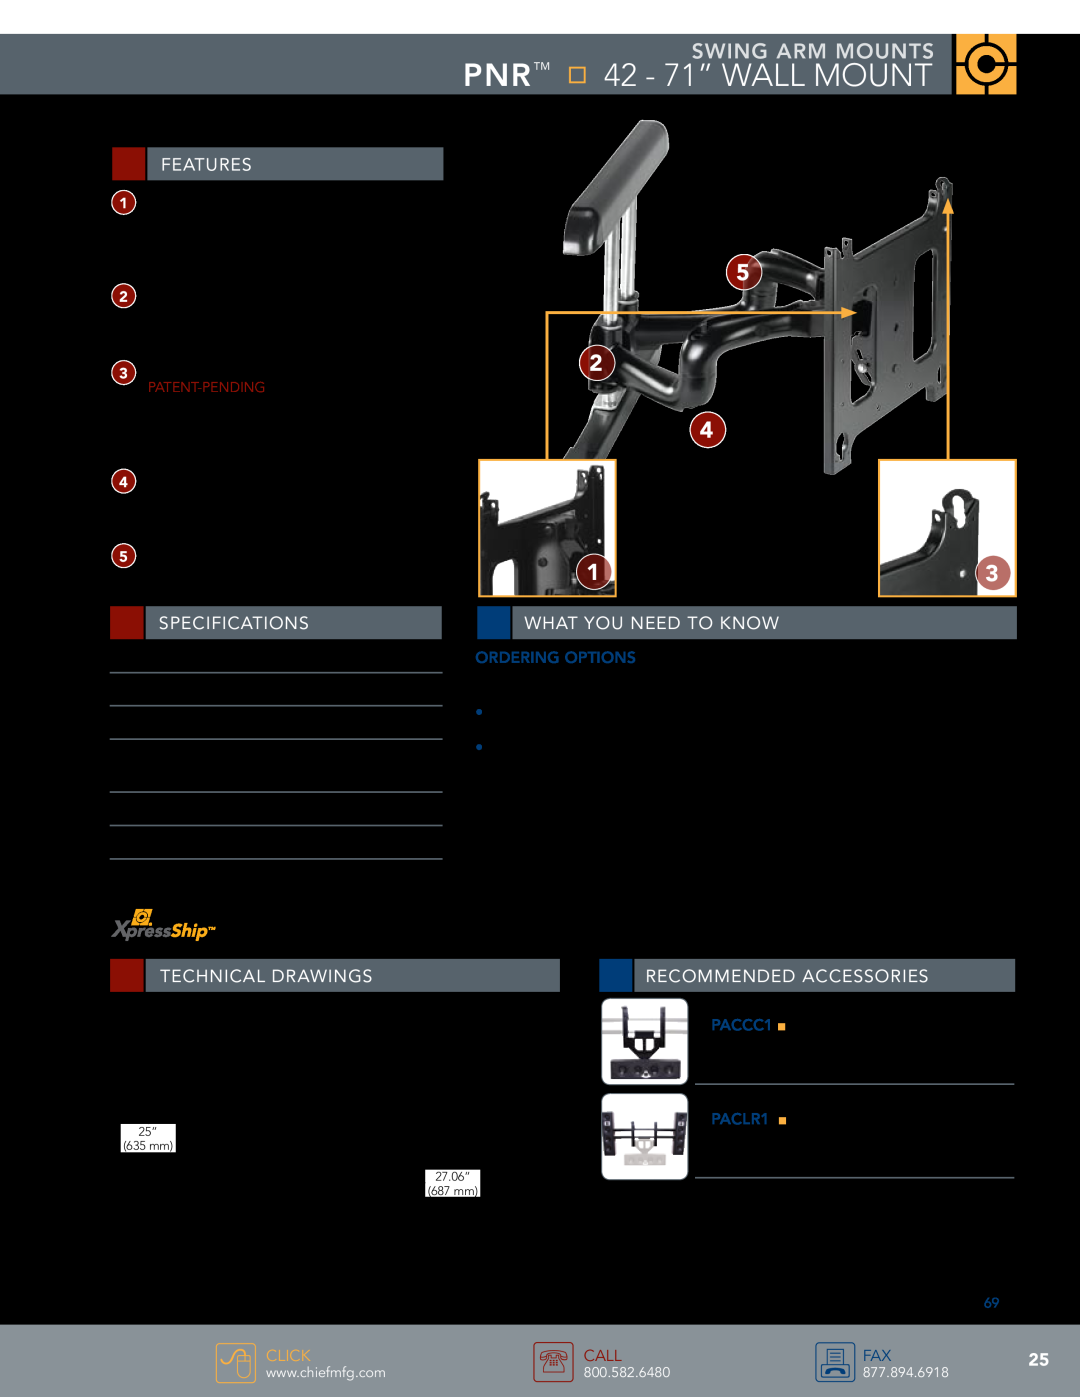 Chief Manufacturing Swing Arm Mounts specifications PNR 42 - 71” Wall Mount, swing arm mounts, Features, Specifications 